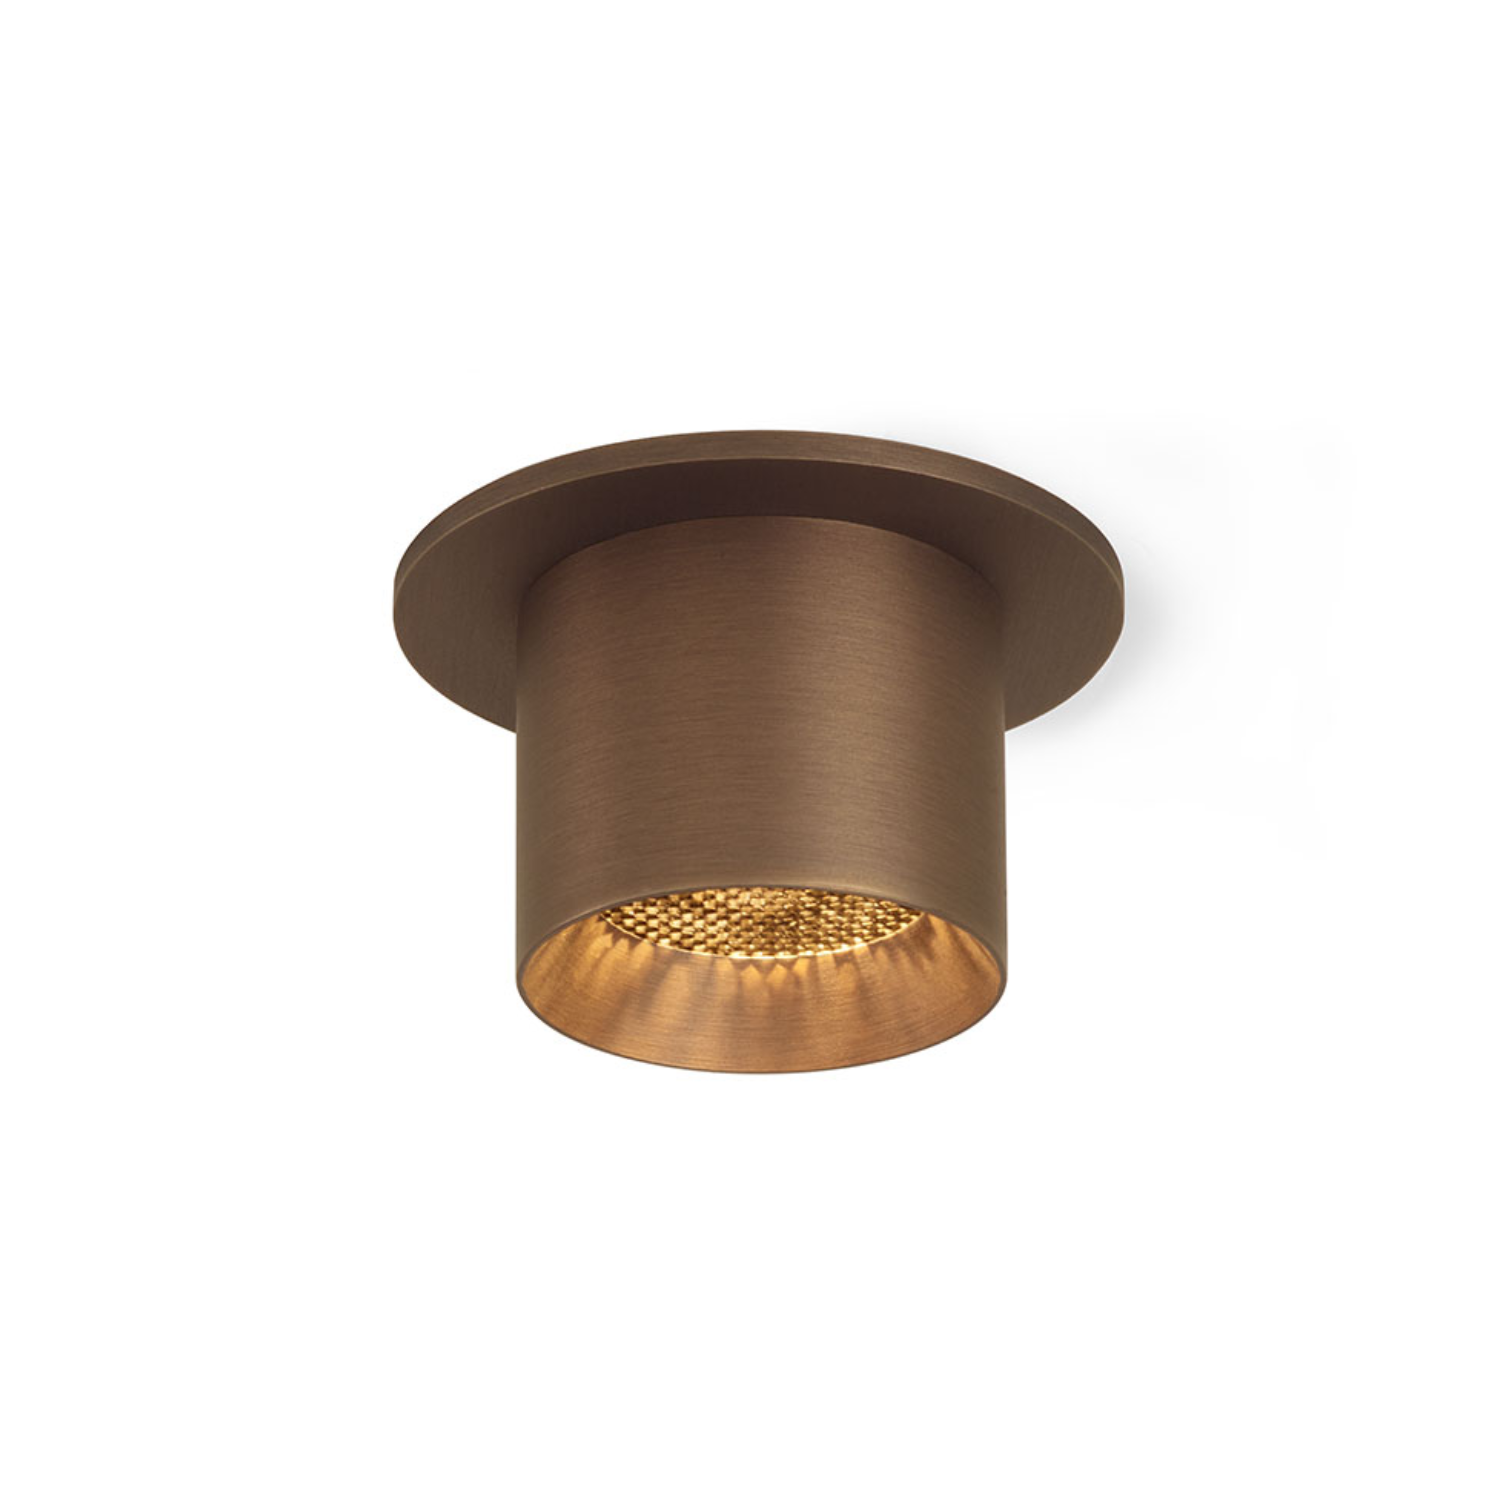 AUDY-IN - Ceiling Light